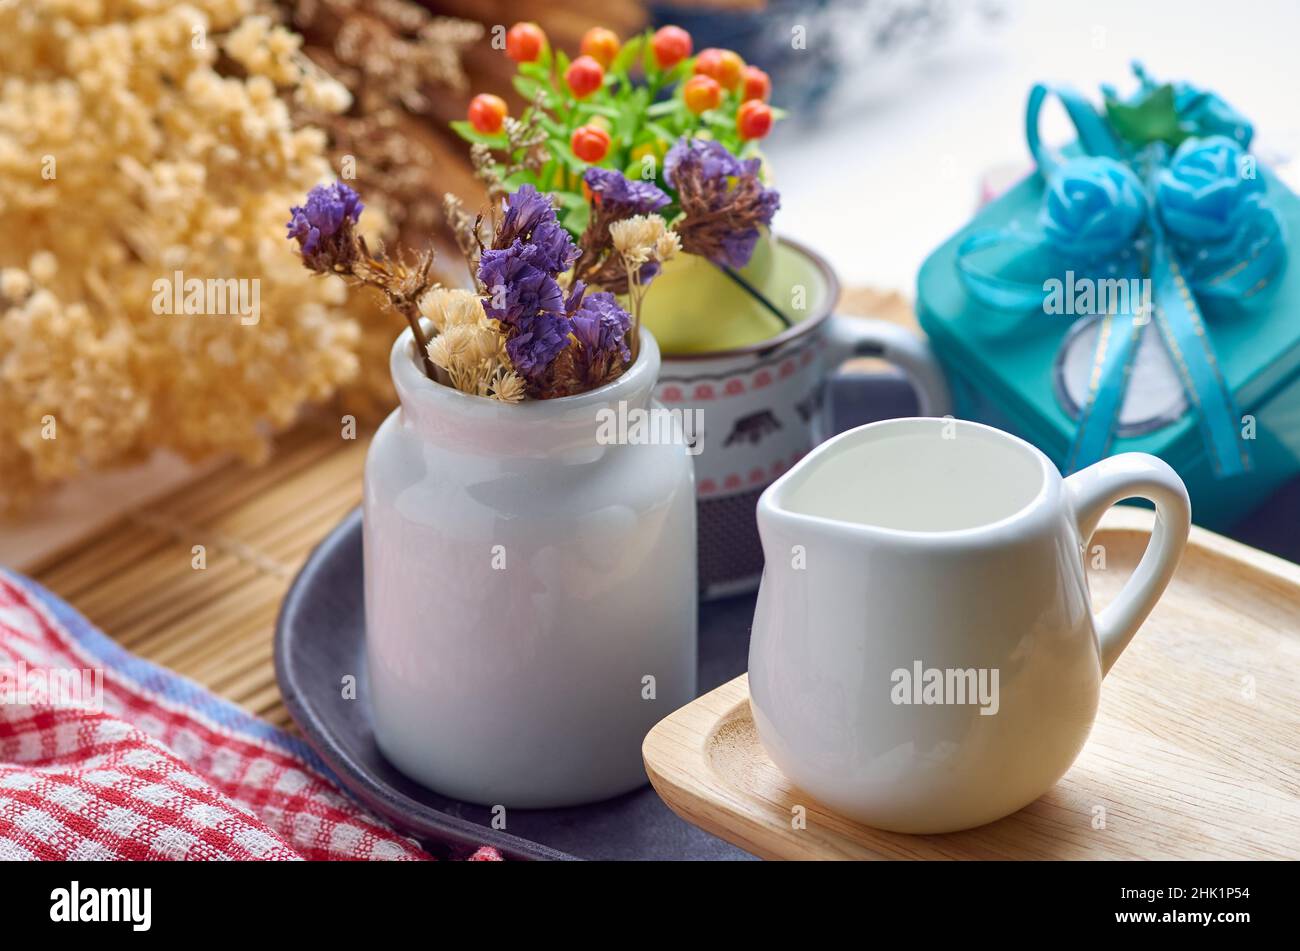 Dried flowers and white ceramic wares Stock Photo